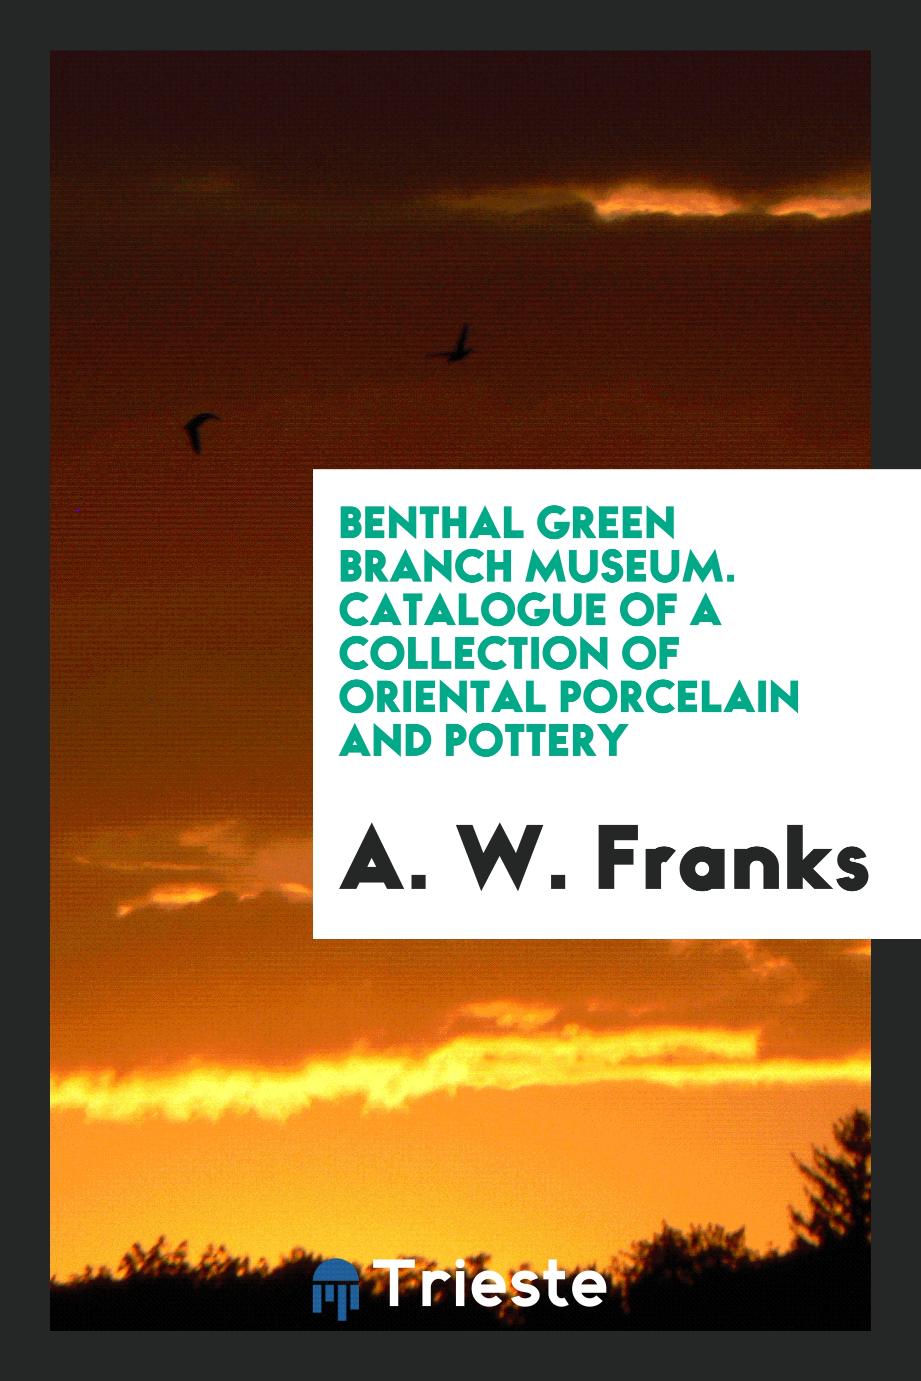 Benthal Green Branch Museum. Catalogue of a Collection of Oriental Porcelain and Pottery